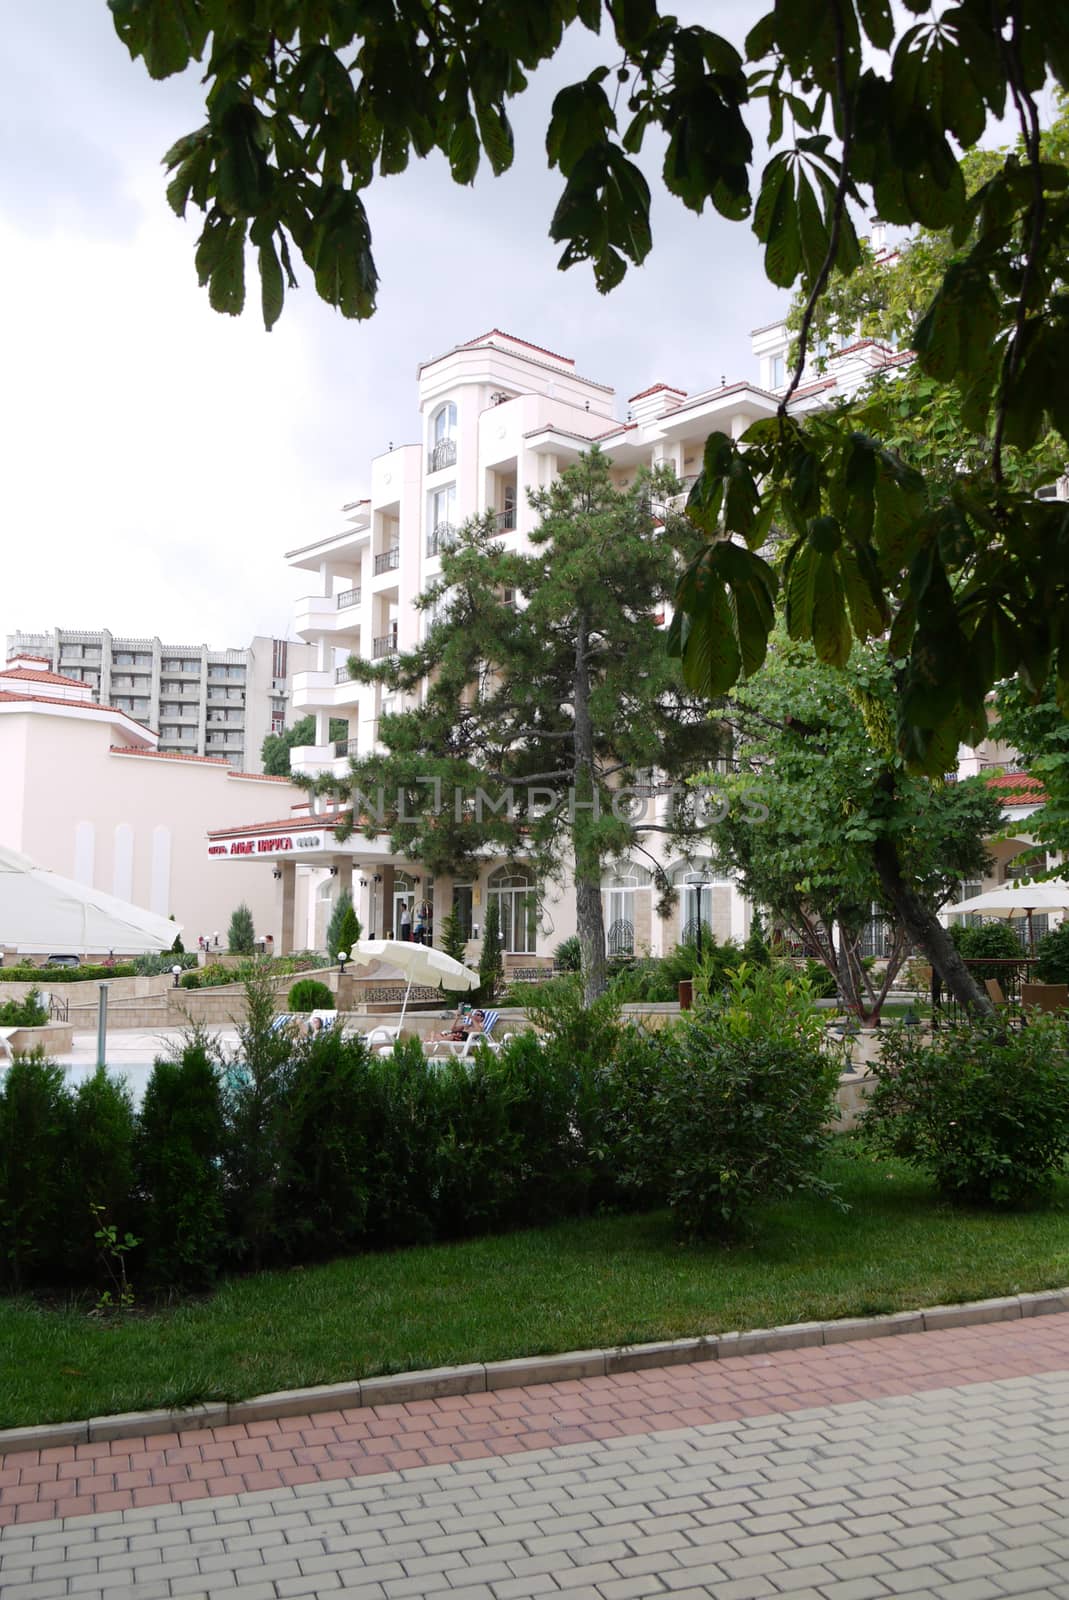 Beautiful view of a large white hotel with a swimming pool because of the greenery of bushes and trees growing on the flowerbed.